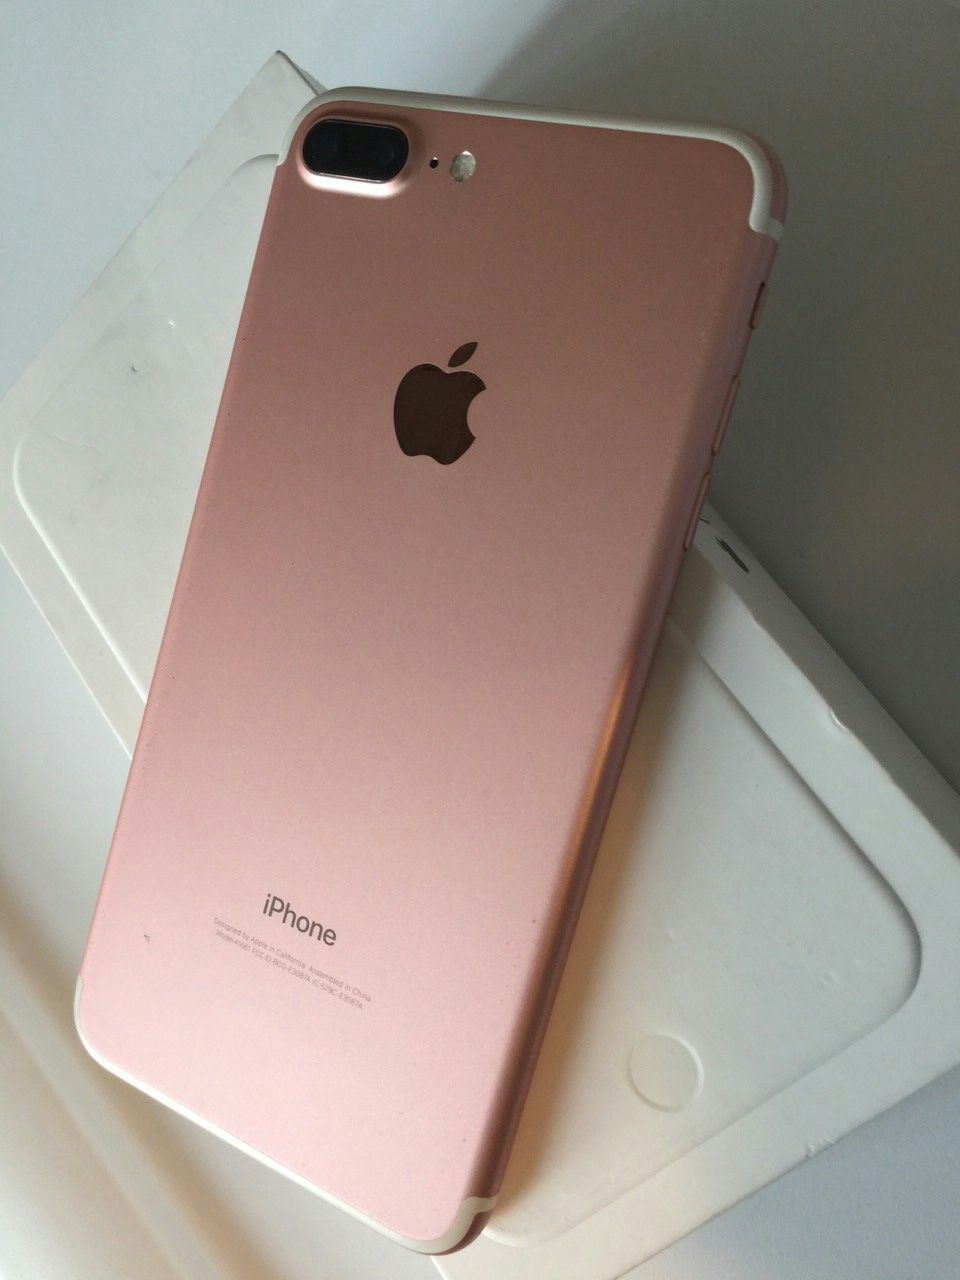 IPhone 7 Plus, 256Gb UNLOCKED//Excellent Condition, Looks like New//Price is Negotiable